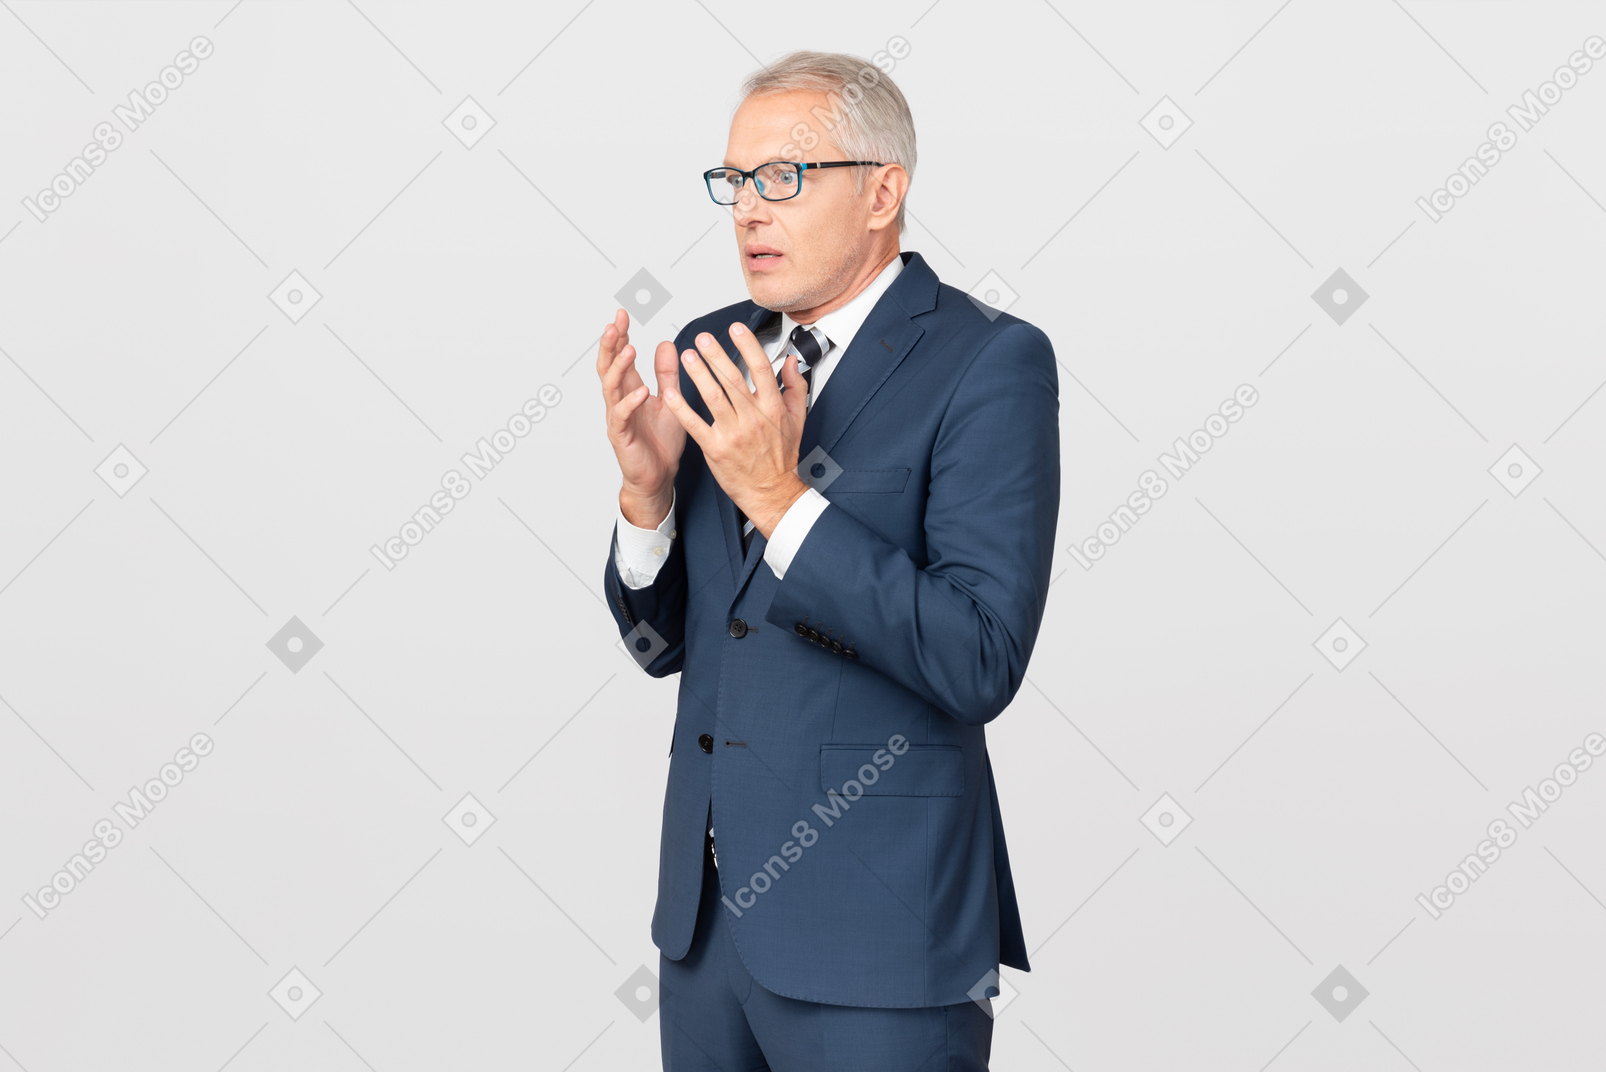 Mature businessman looking shocked with something